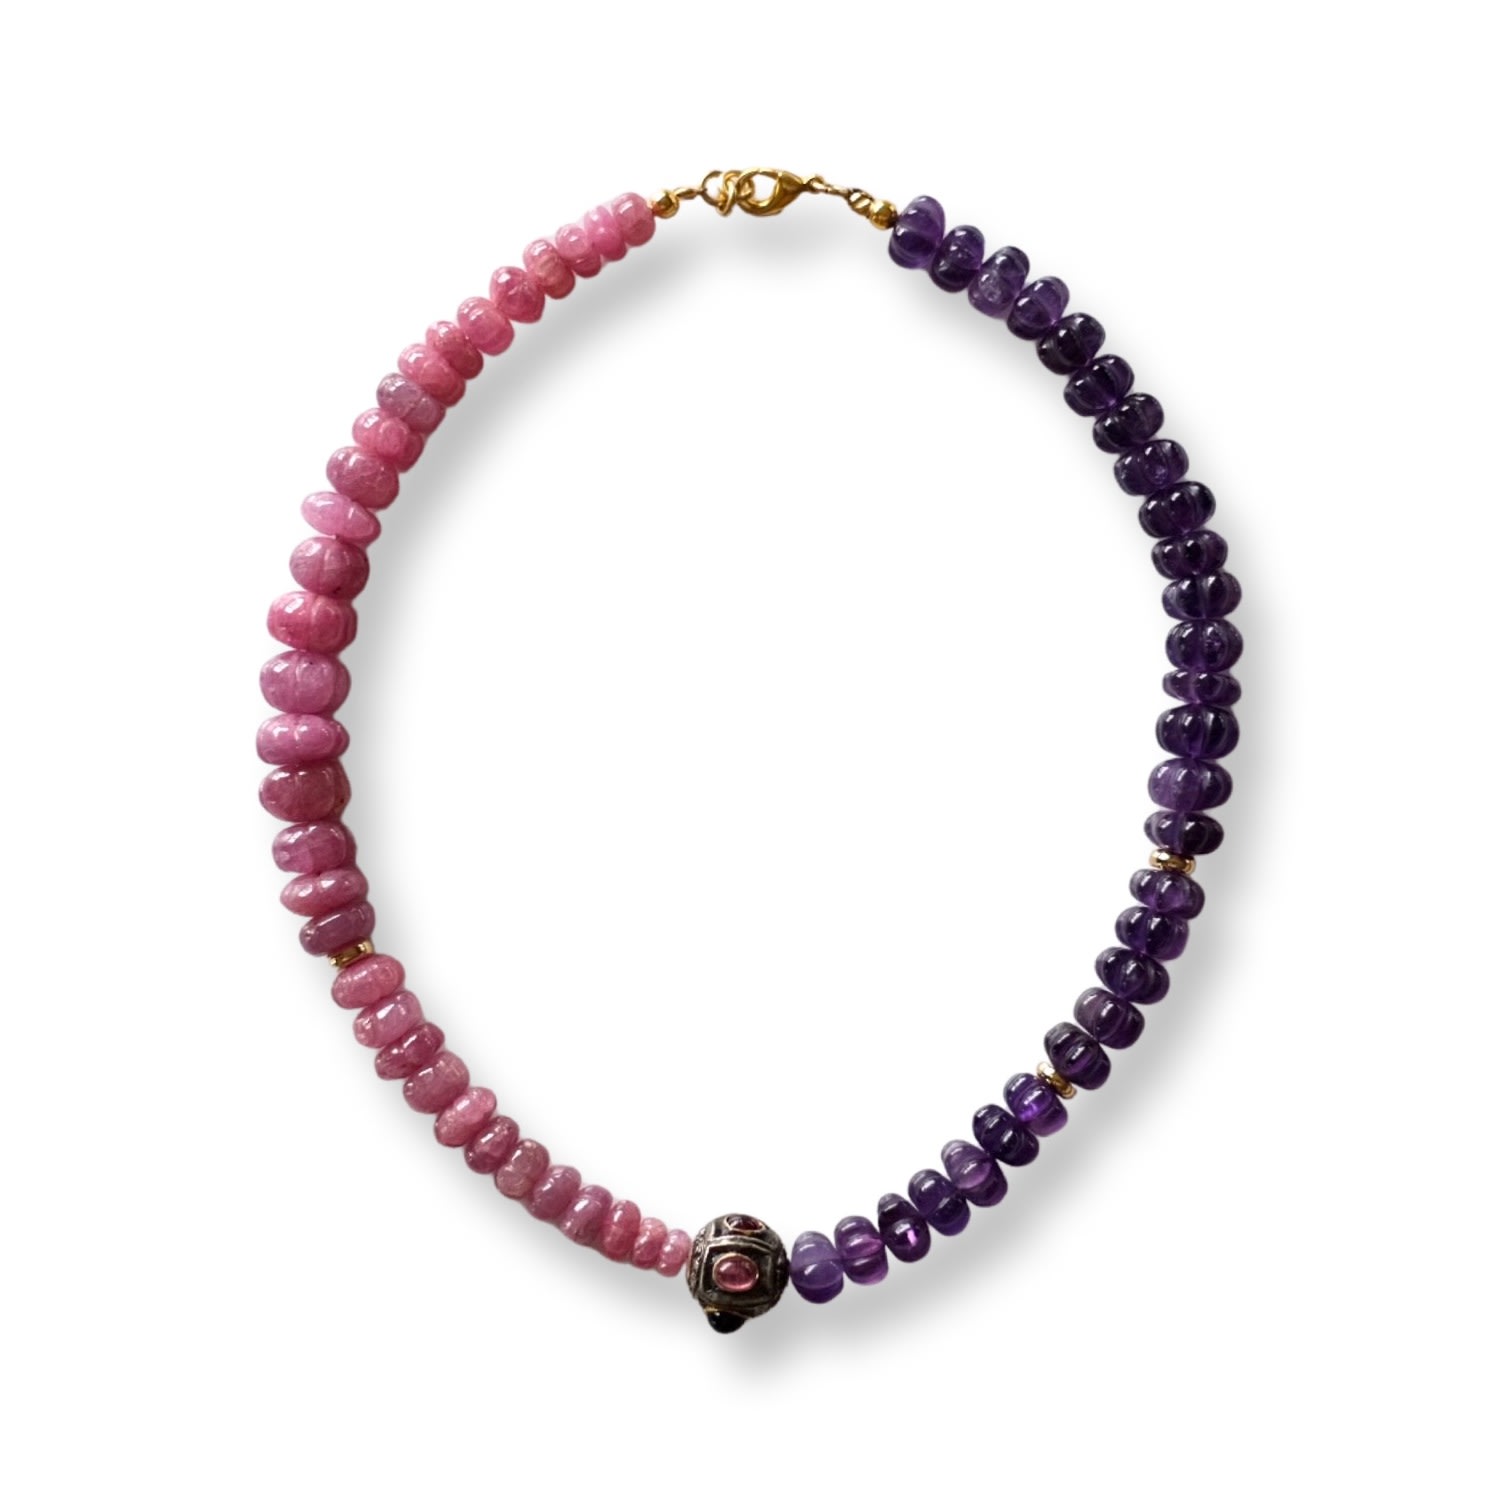 Women’s Pink / Purple Pink Sapphire And Amethyst Necklace With Tourmaline Inlaid Bead Binibeca Design